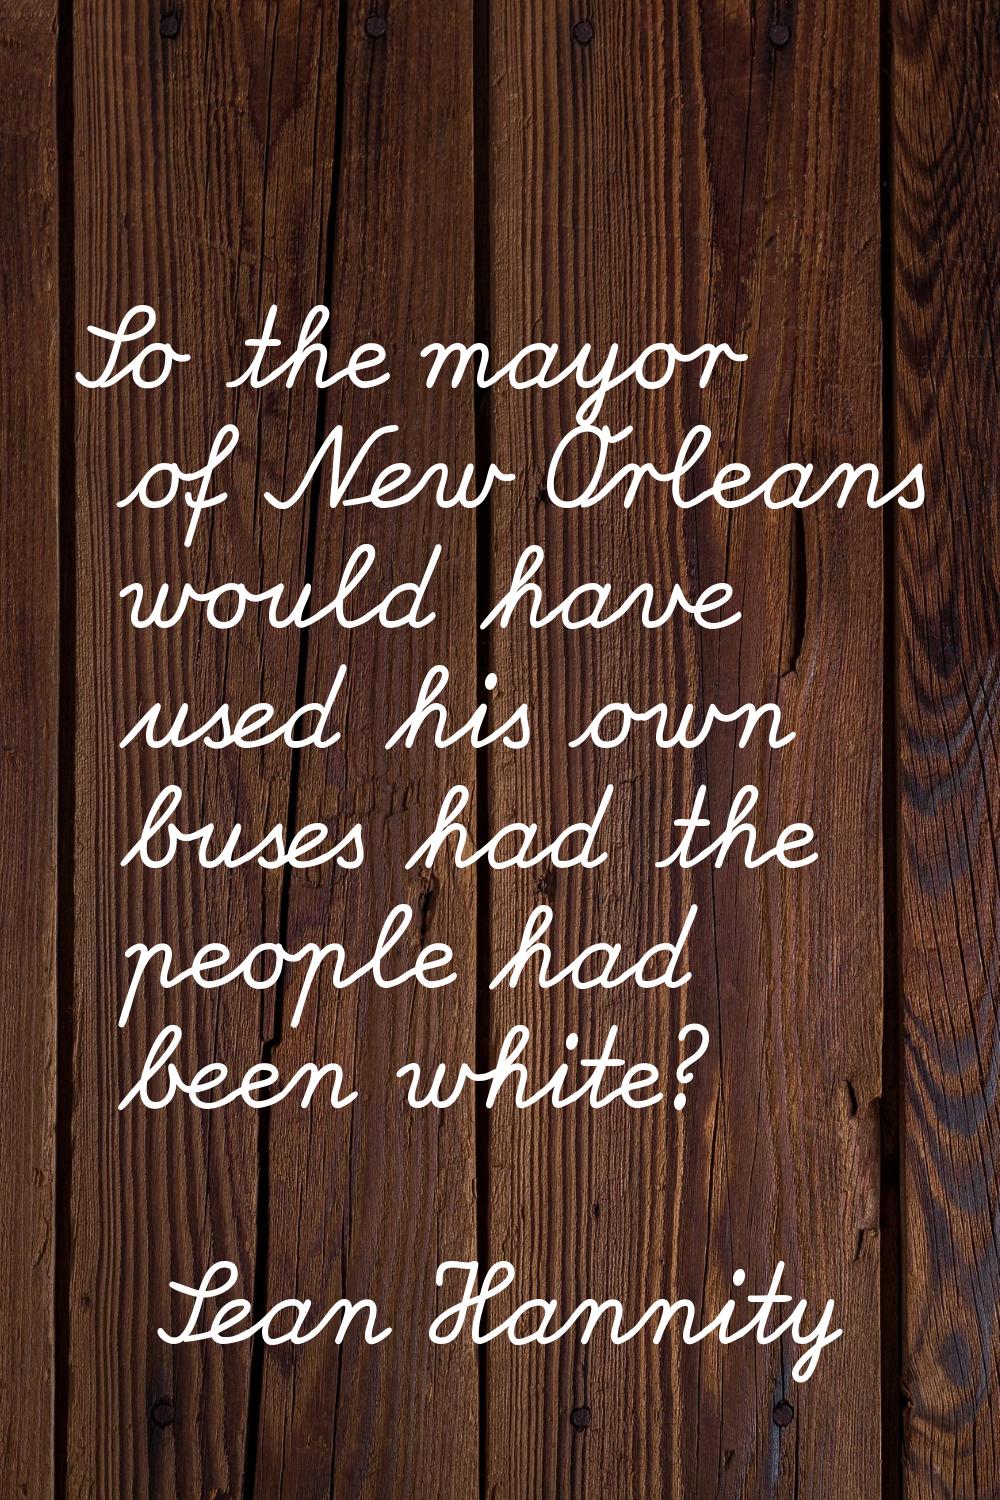 So the mayor of New Orleans would have used his own buses had the people had been white?